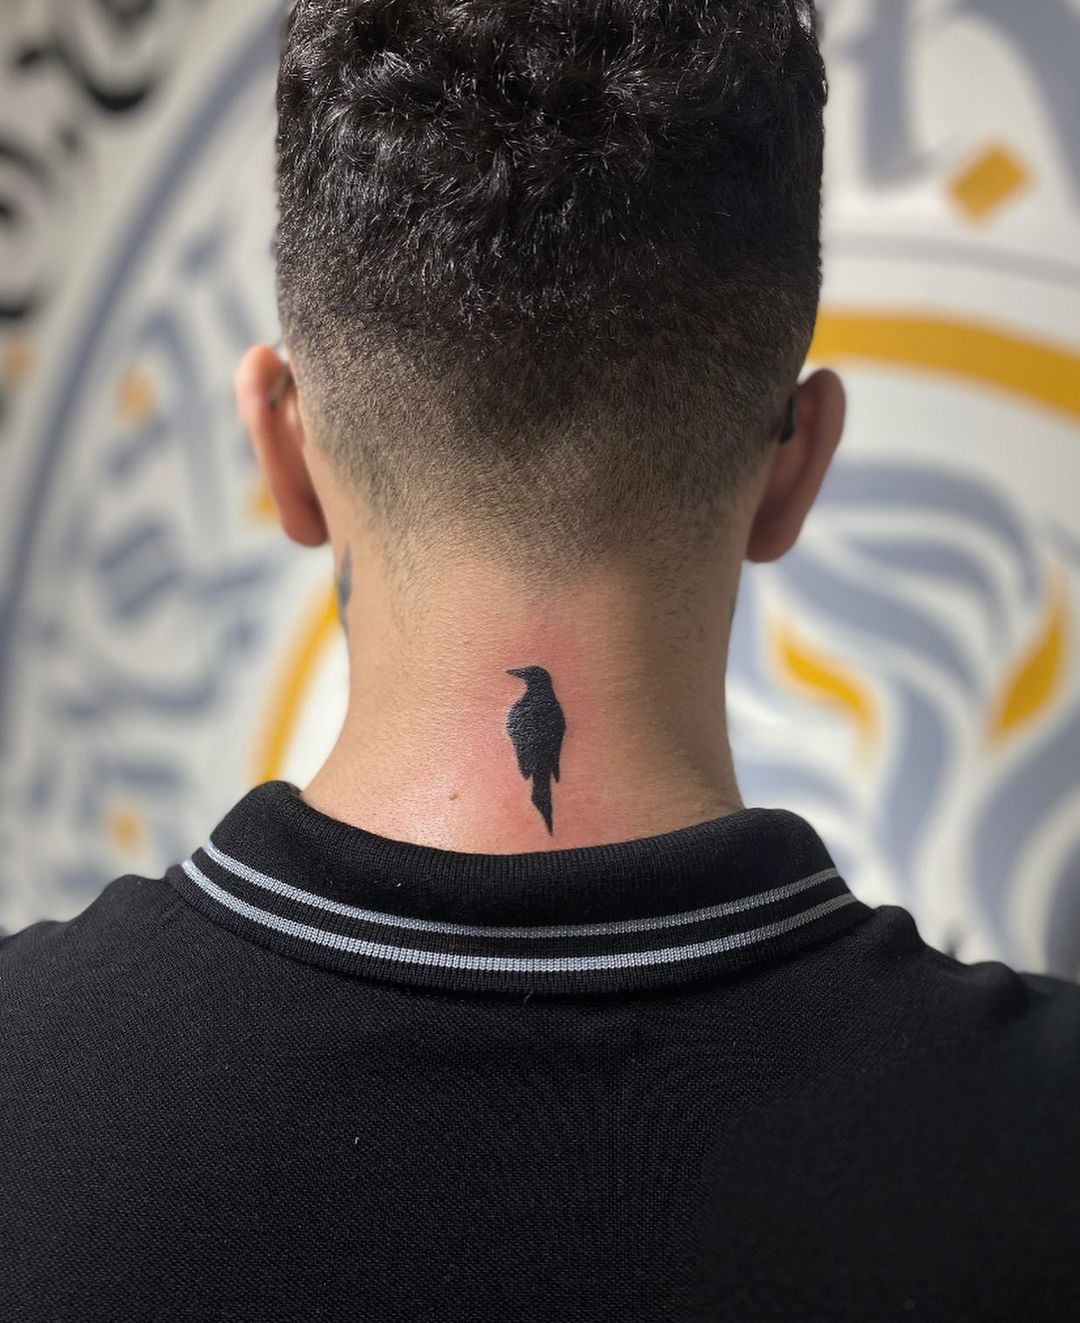 25 Men's Back Tattoo Ideas: Find Your Perfect Design in 2023 - Tikli